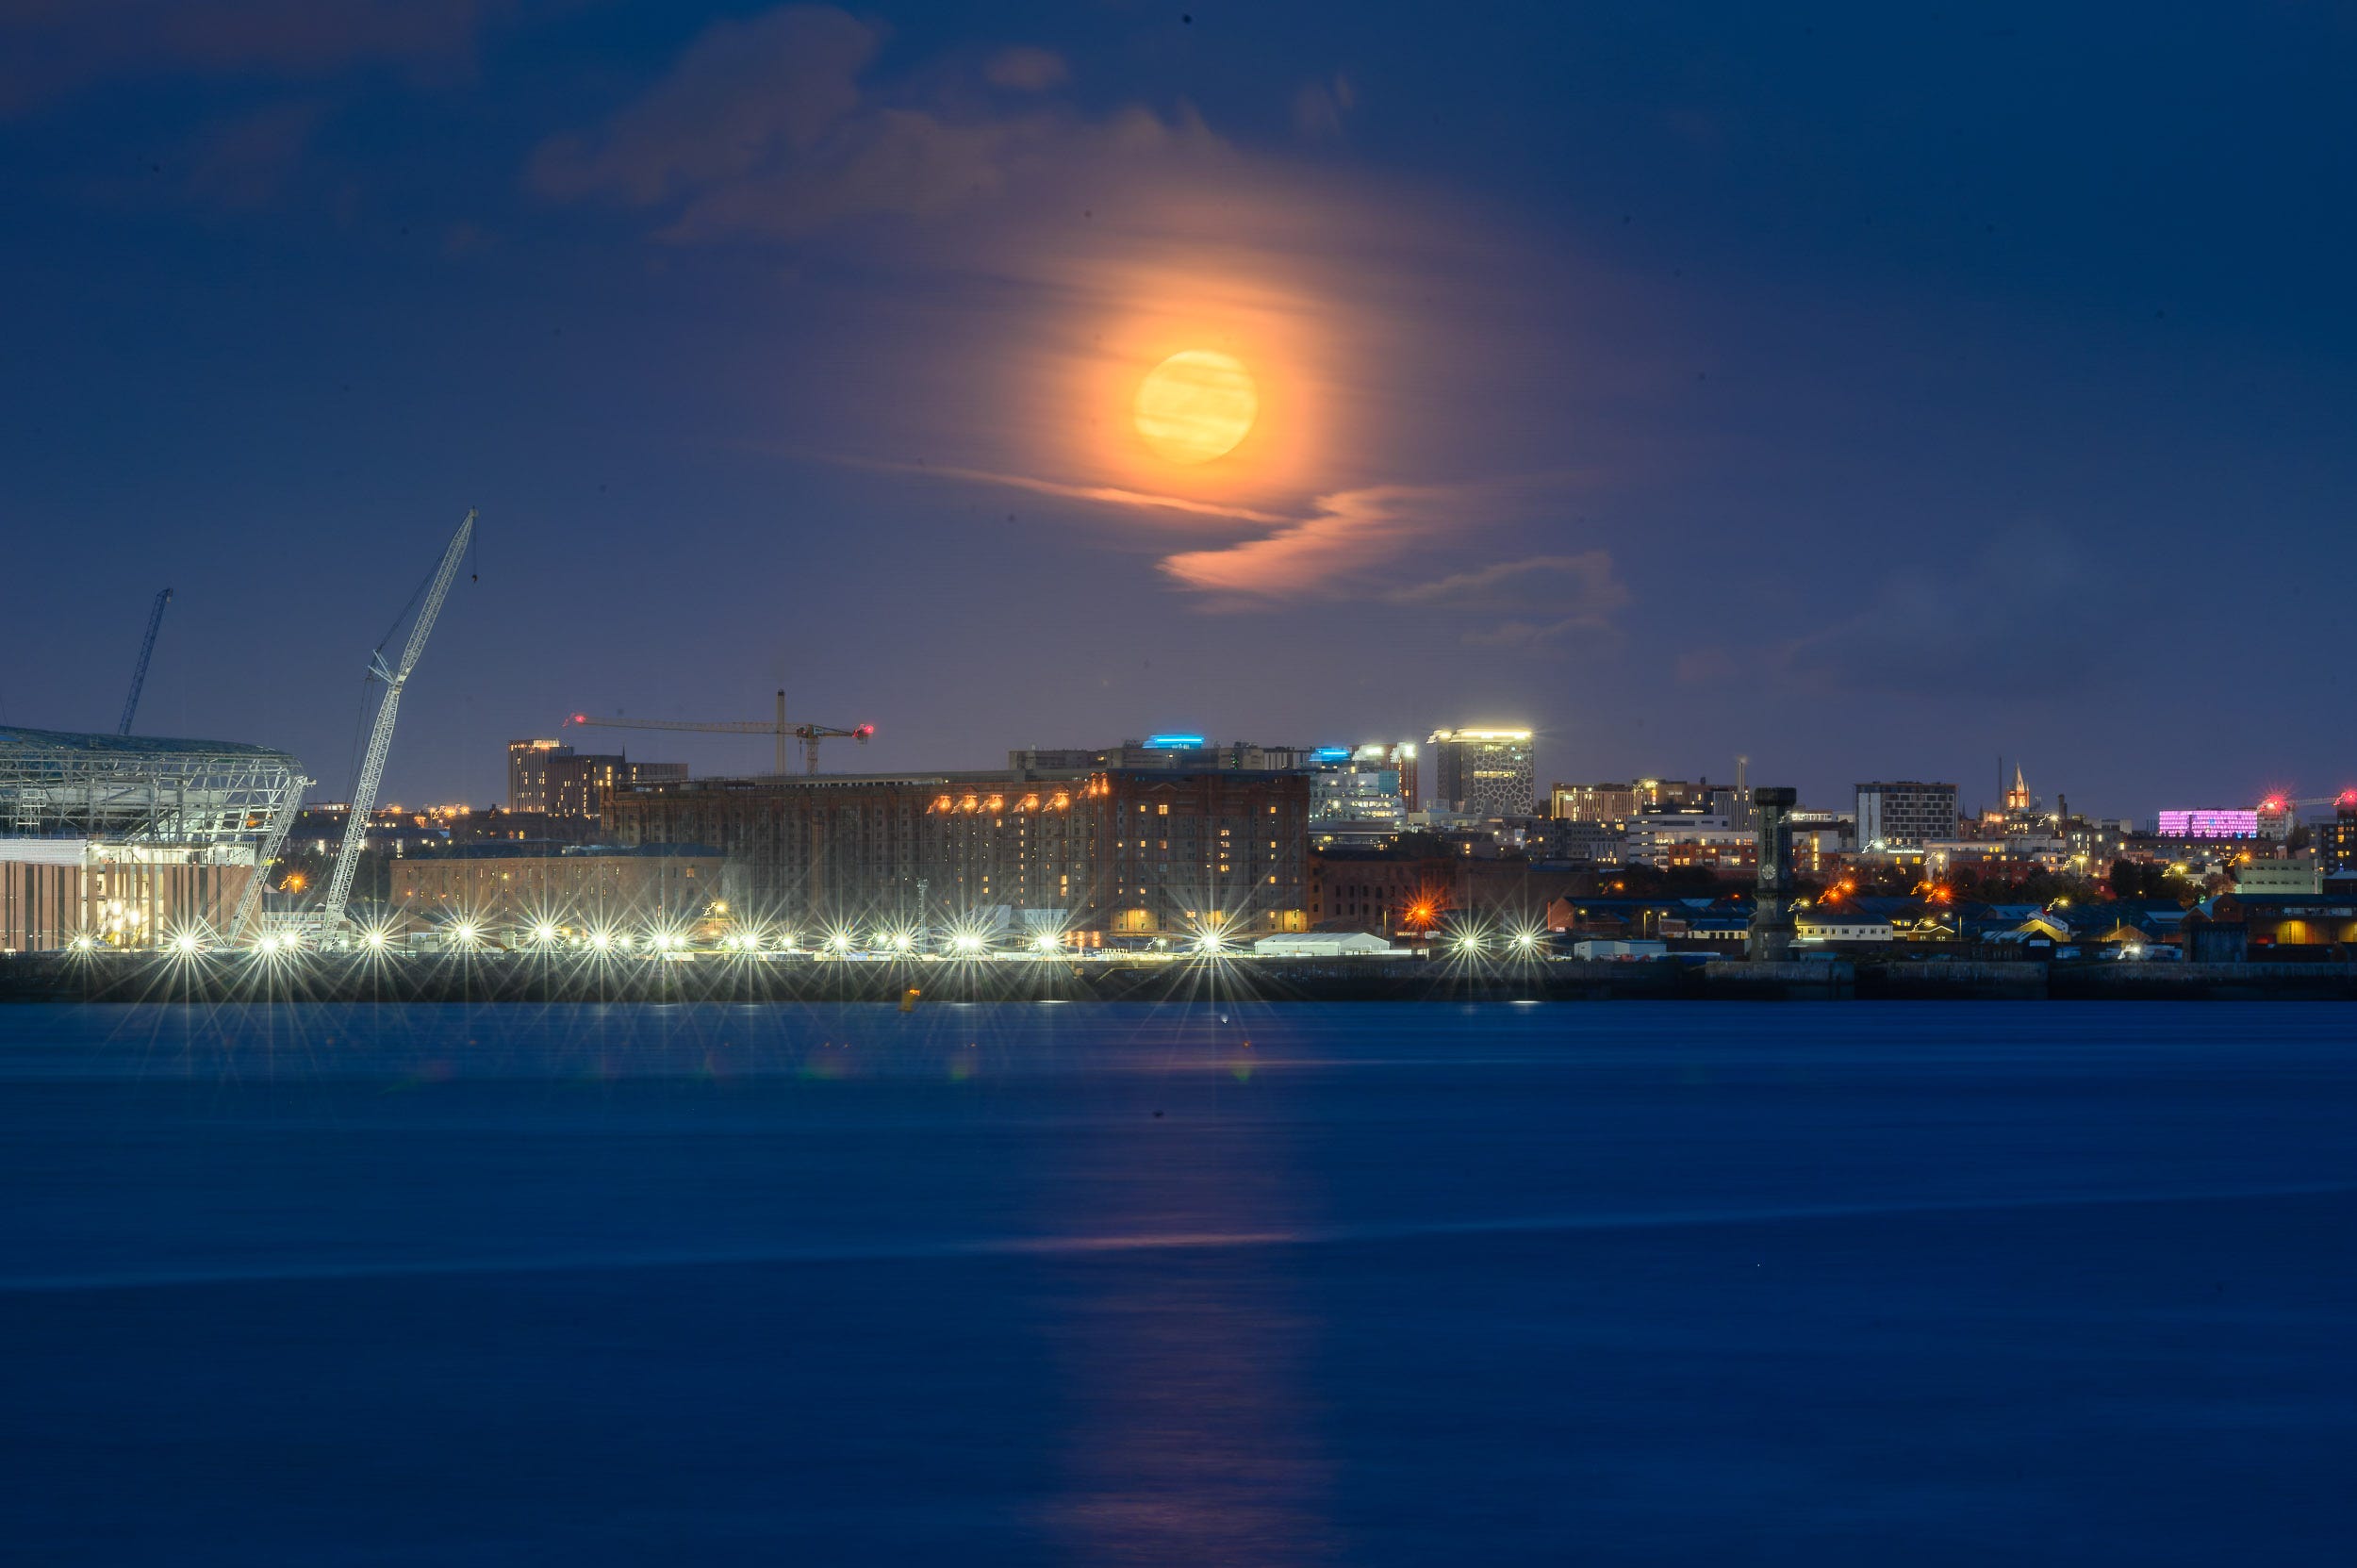 Super blue moon rises through the clouds over the Liverpool waterfront.